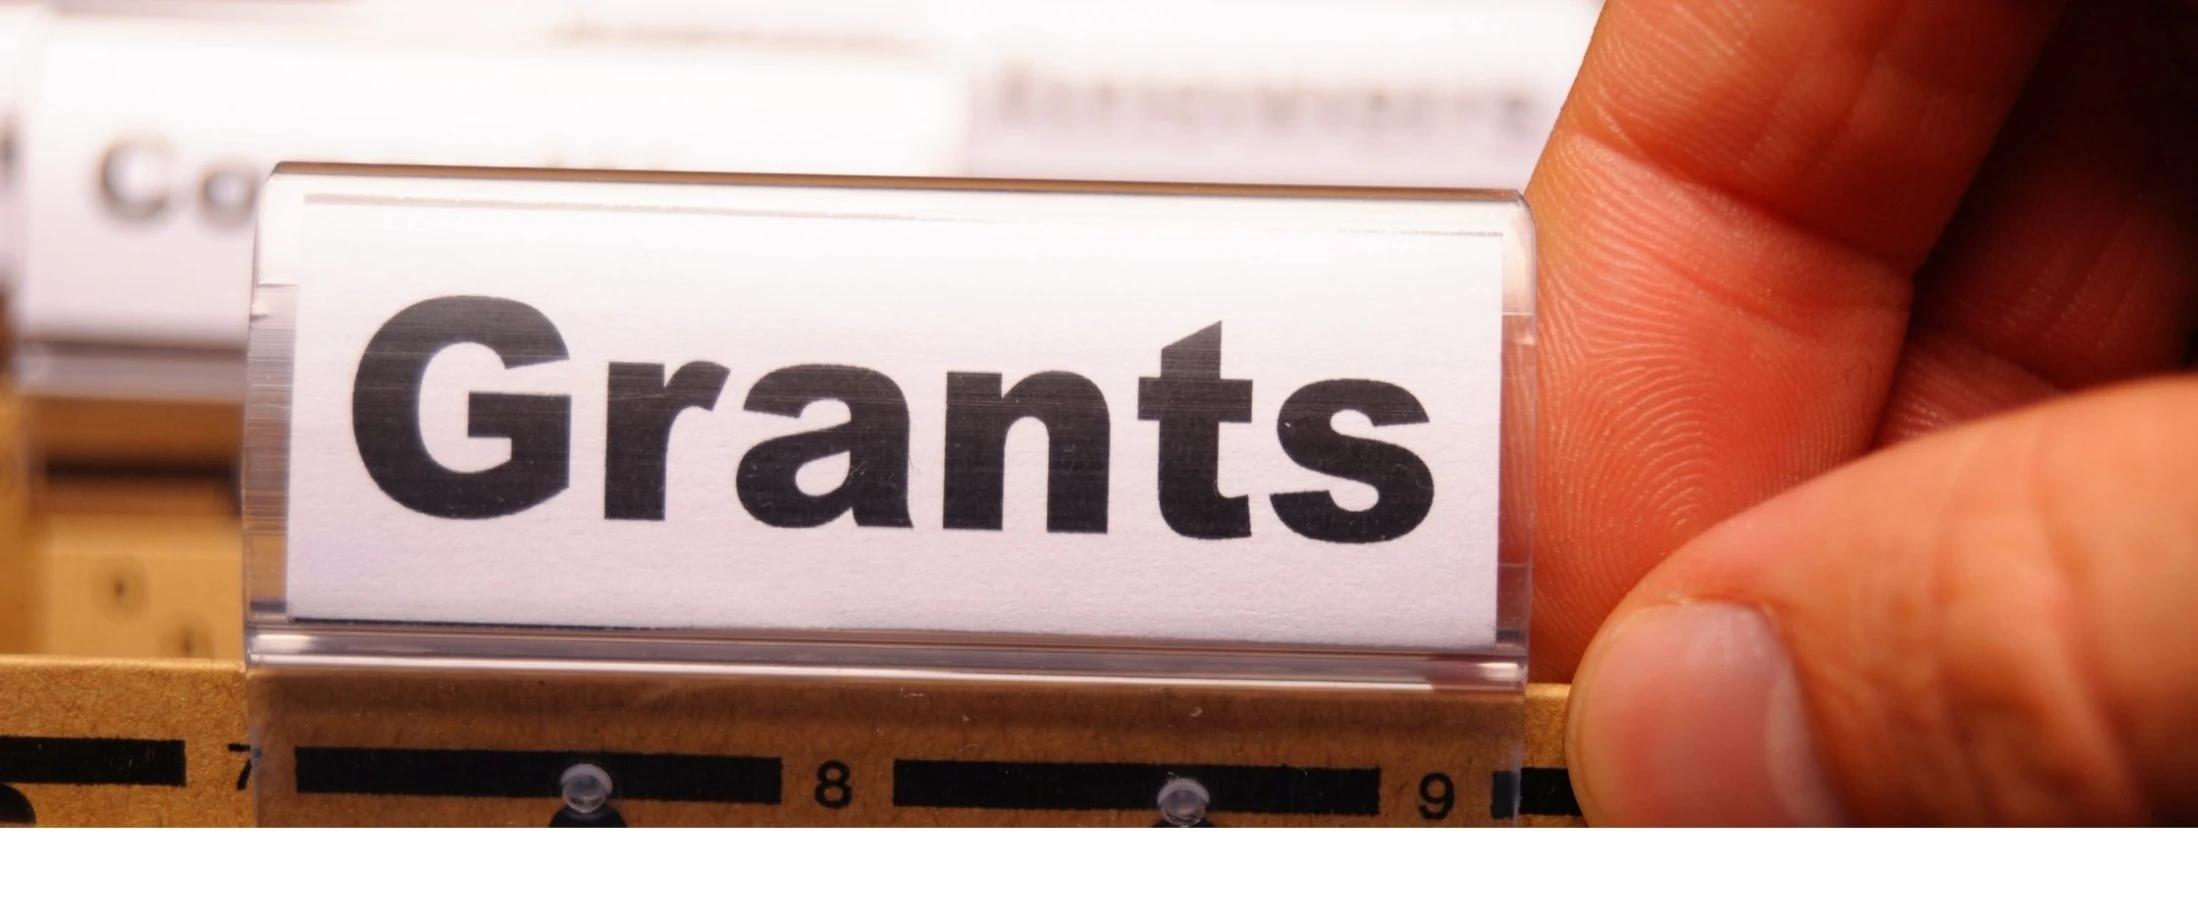 Board of Education Grants available